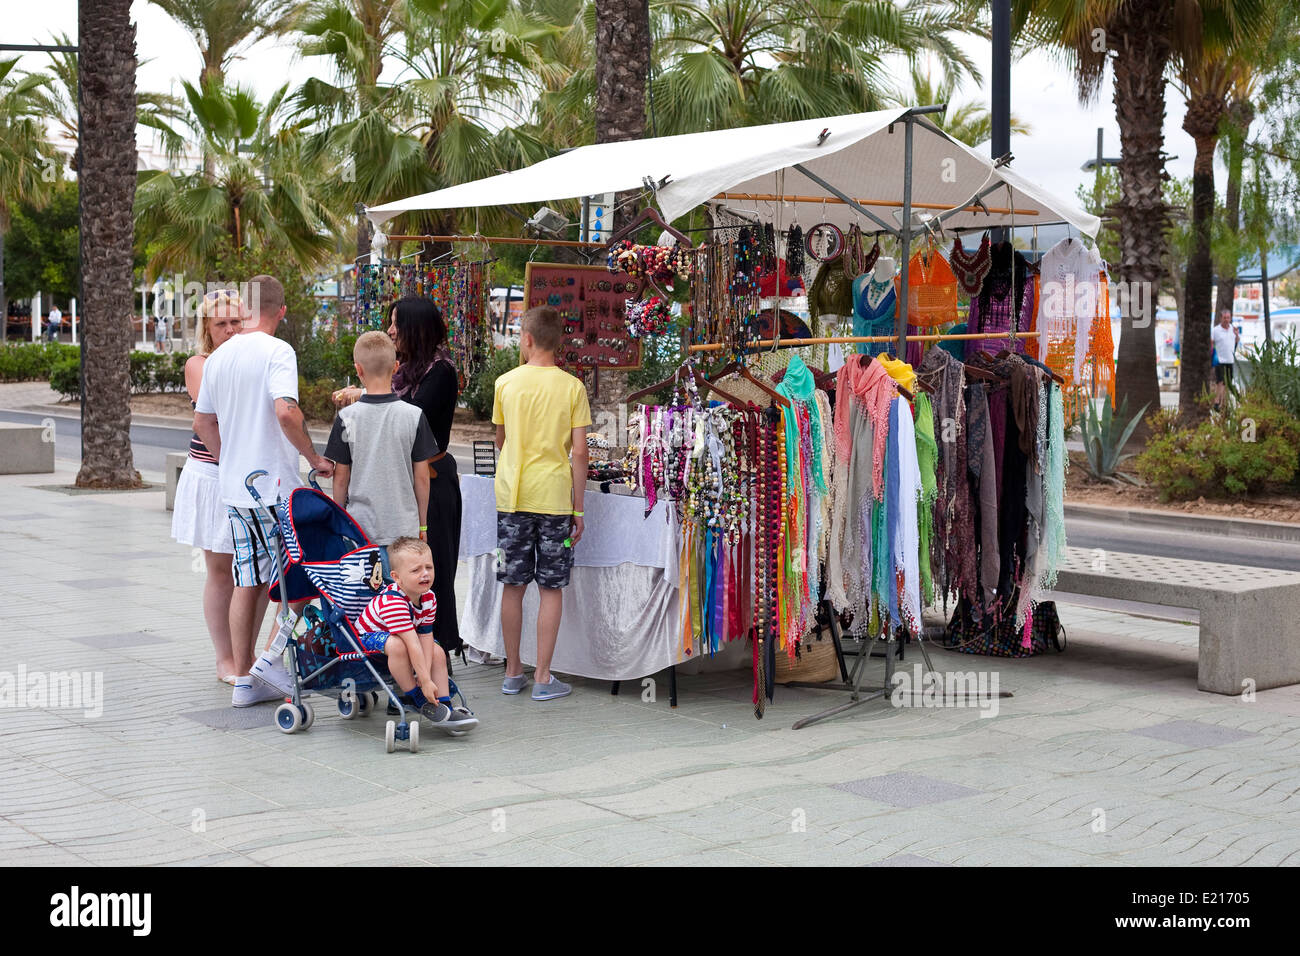 market trader bargaining with a family in Ibiza Stock Photo